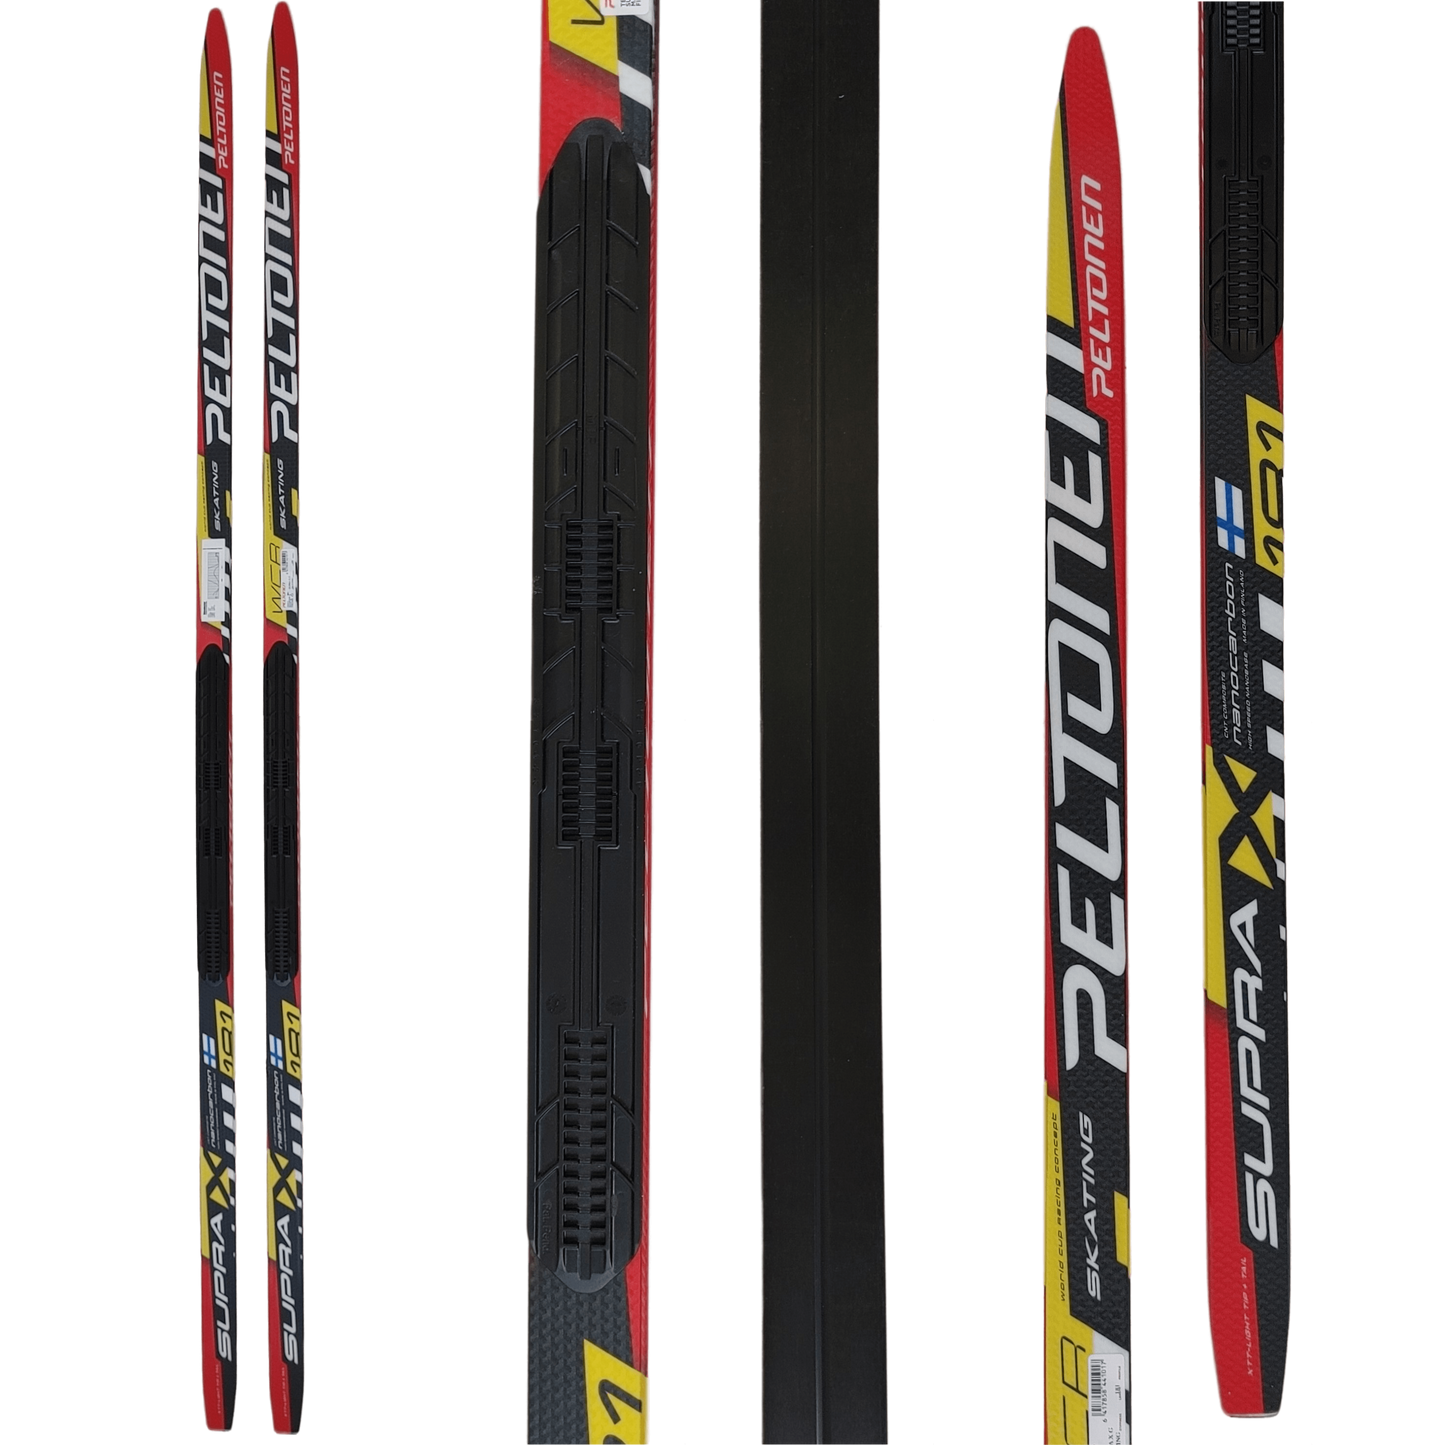 A product picture of the Peltonen SUPRA X UNIVERSAL 2016 181cm Skate Skis B-GRADE MINOR DEFECTS